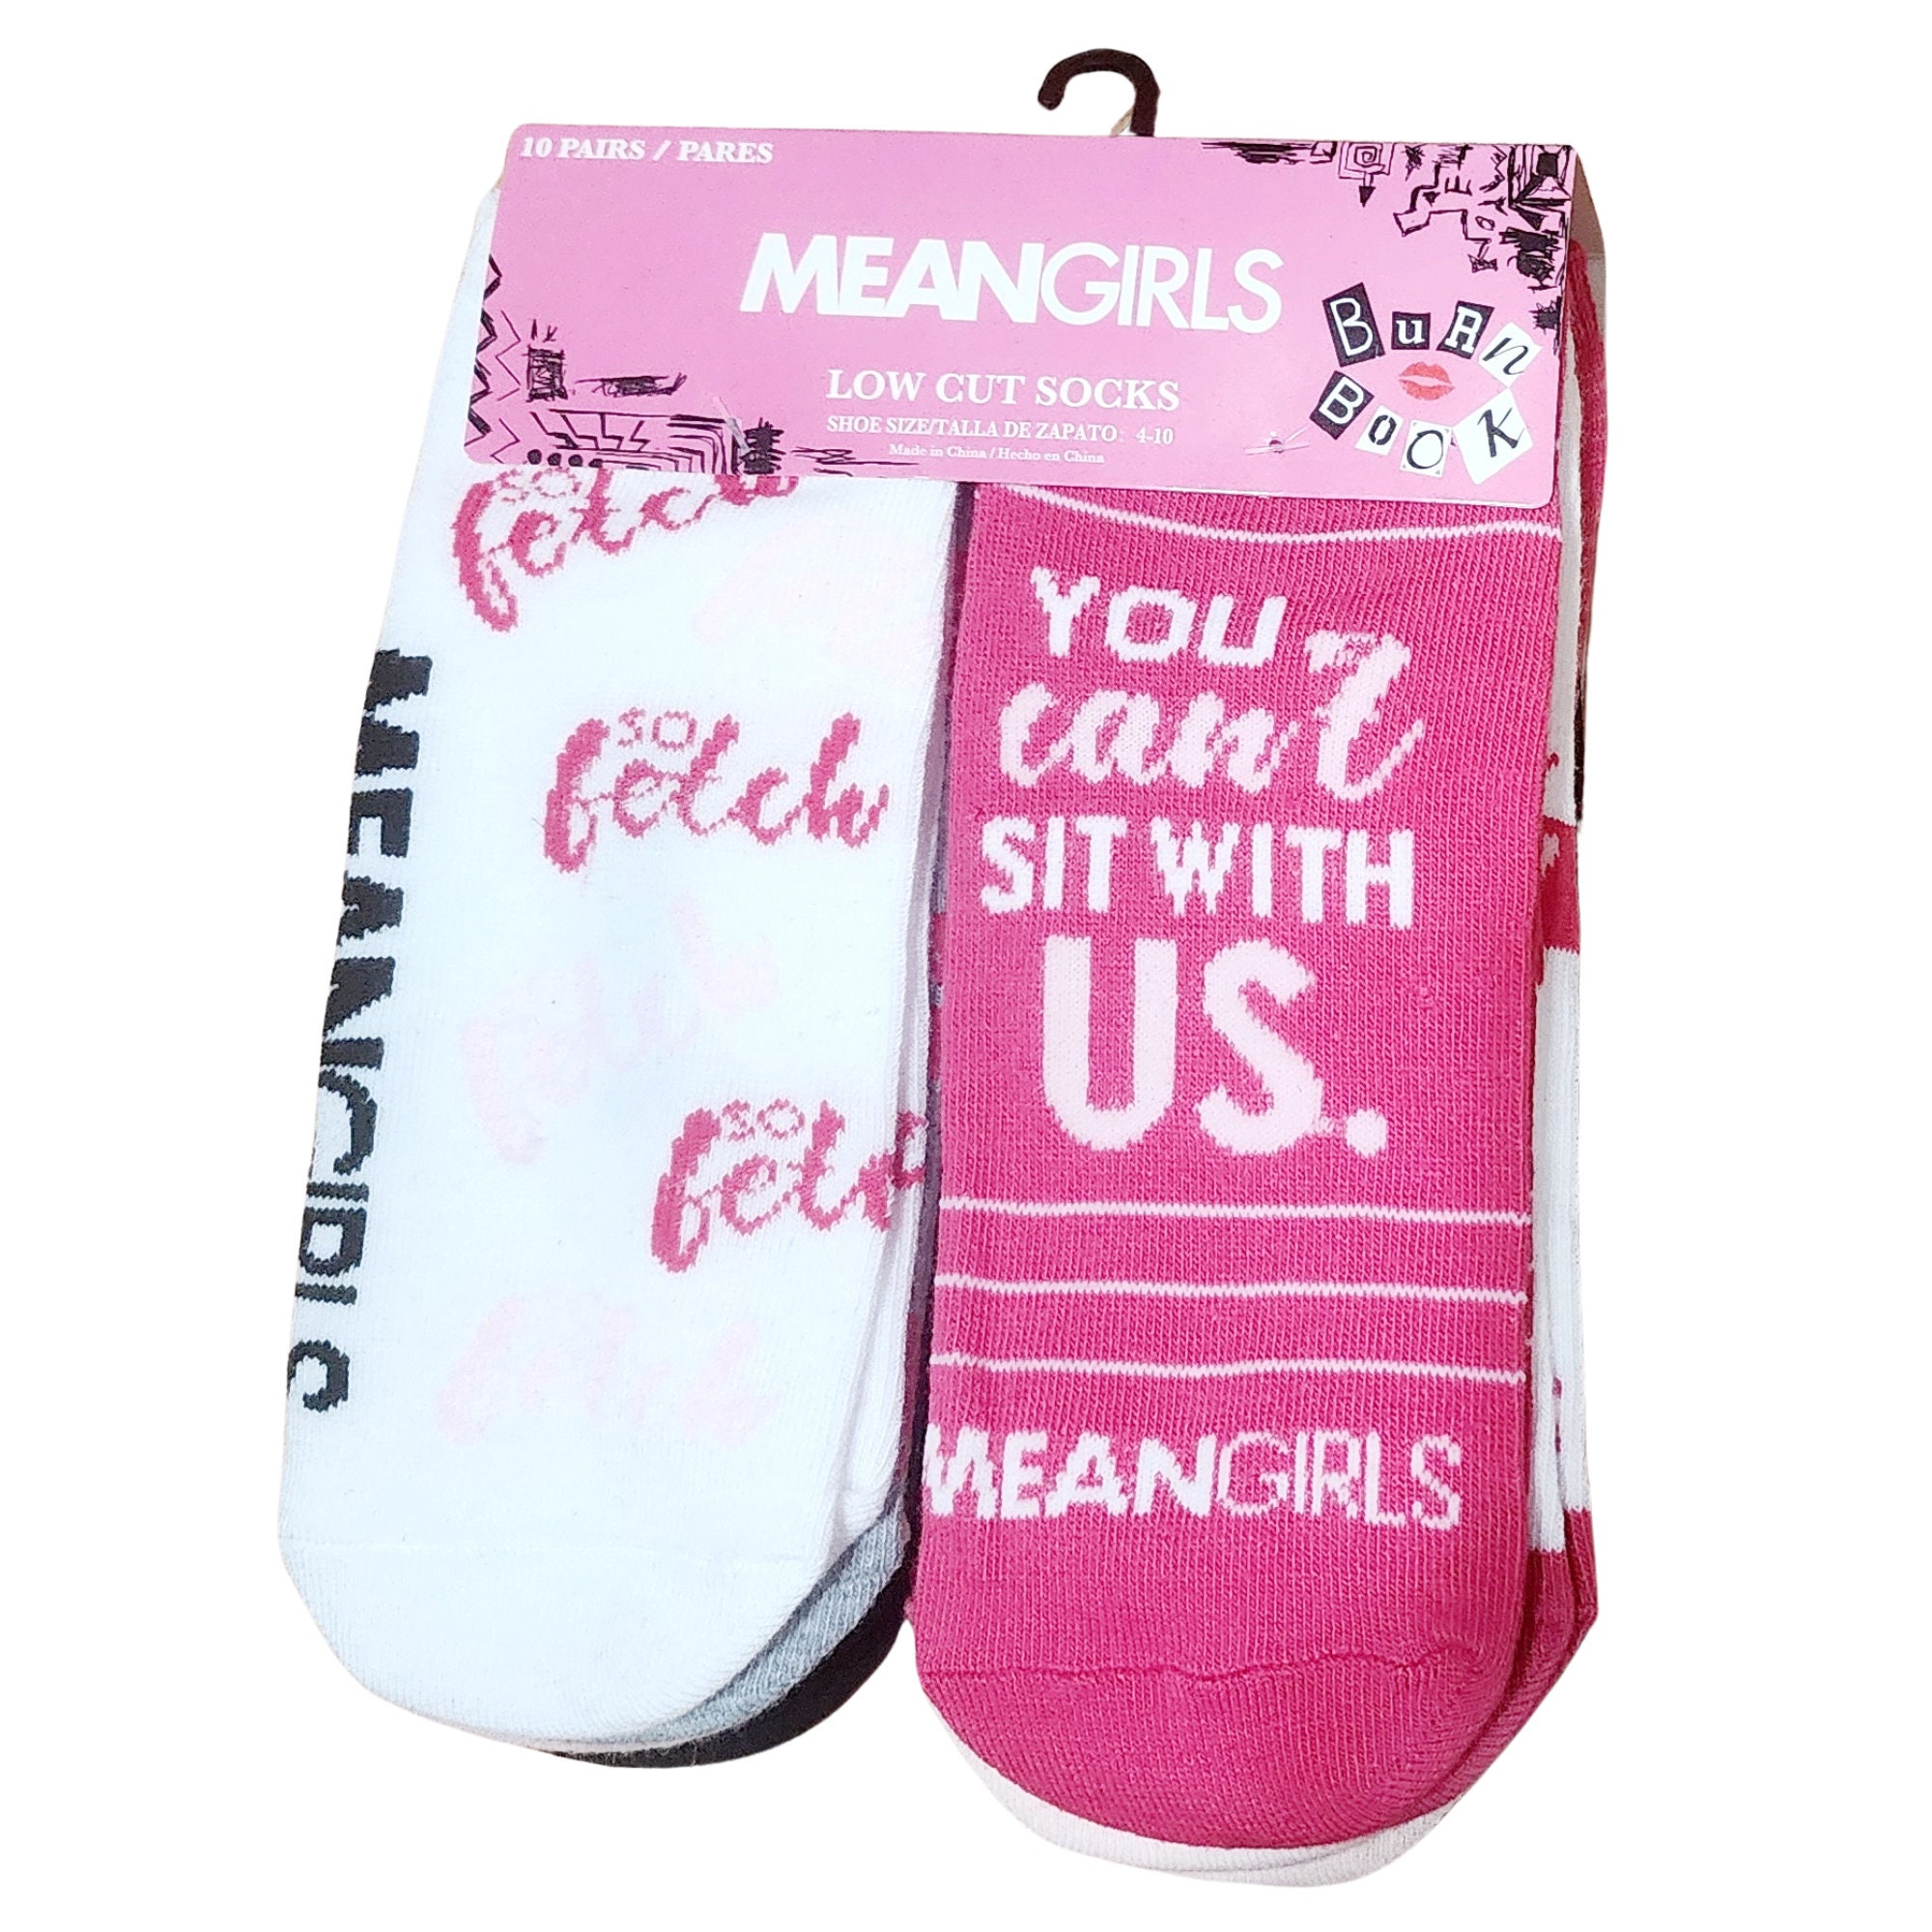  Cool Socks, Mean Girls Wear Pink Wednesday, Crew Sock, Funny  Vibrant Print : Clothing, Shoes & Jewelry